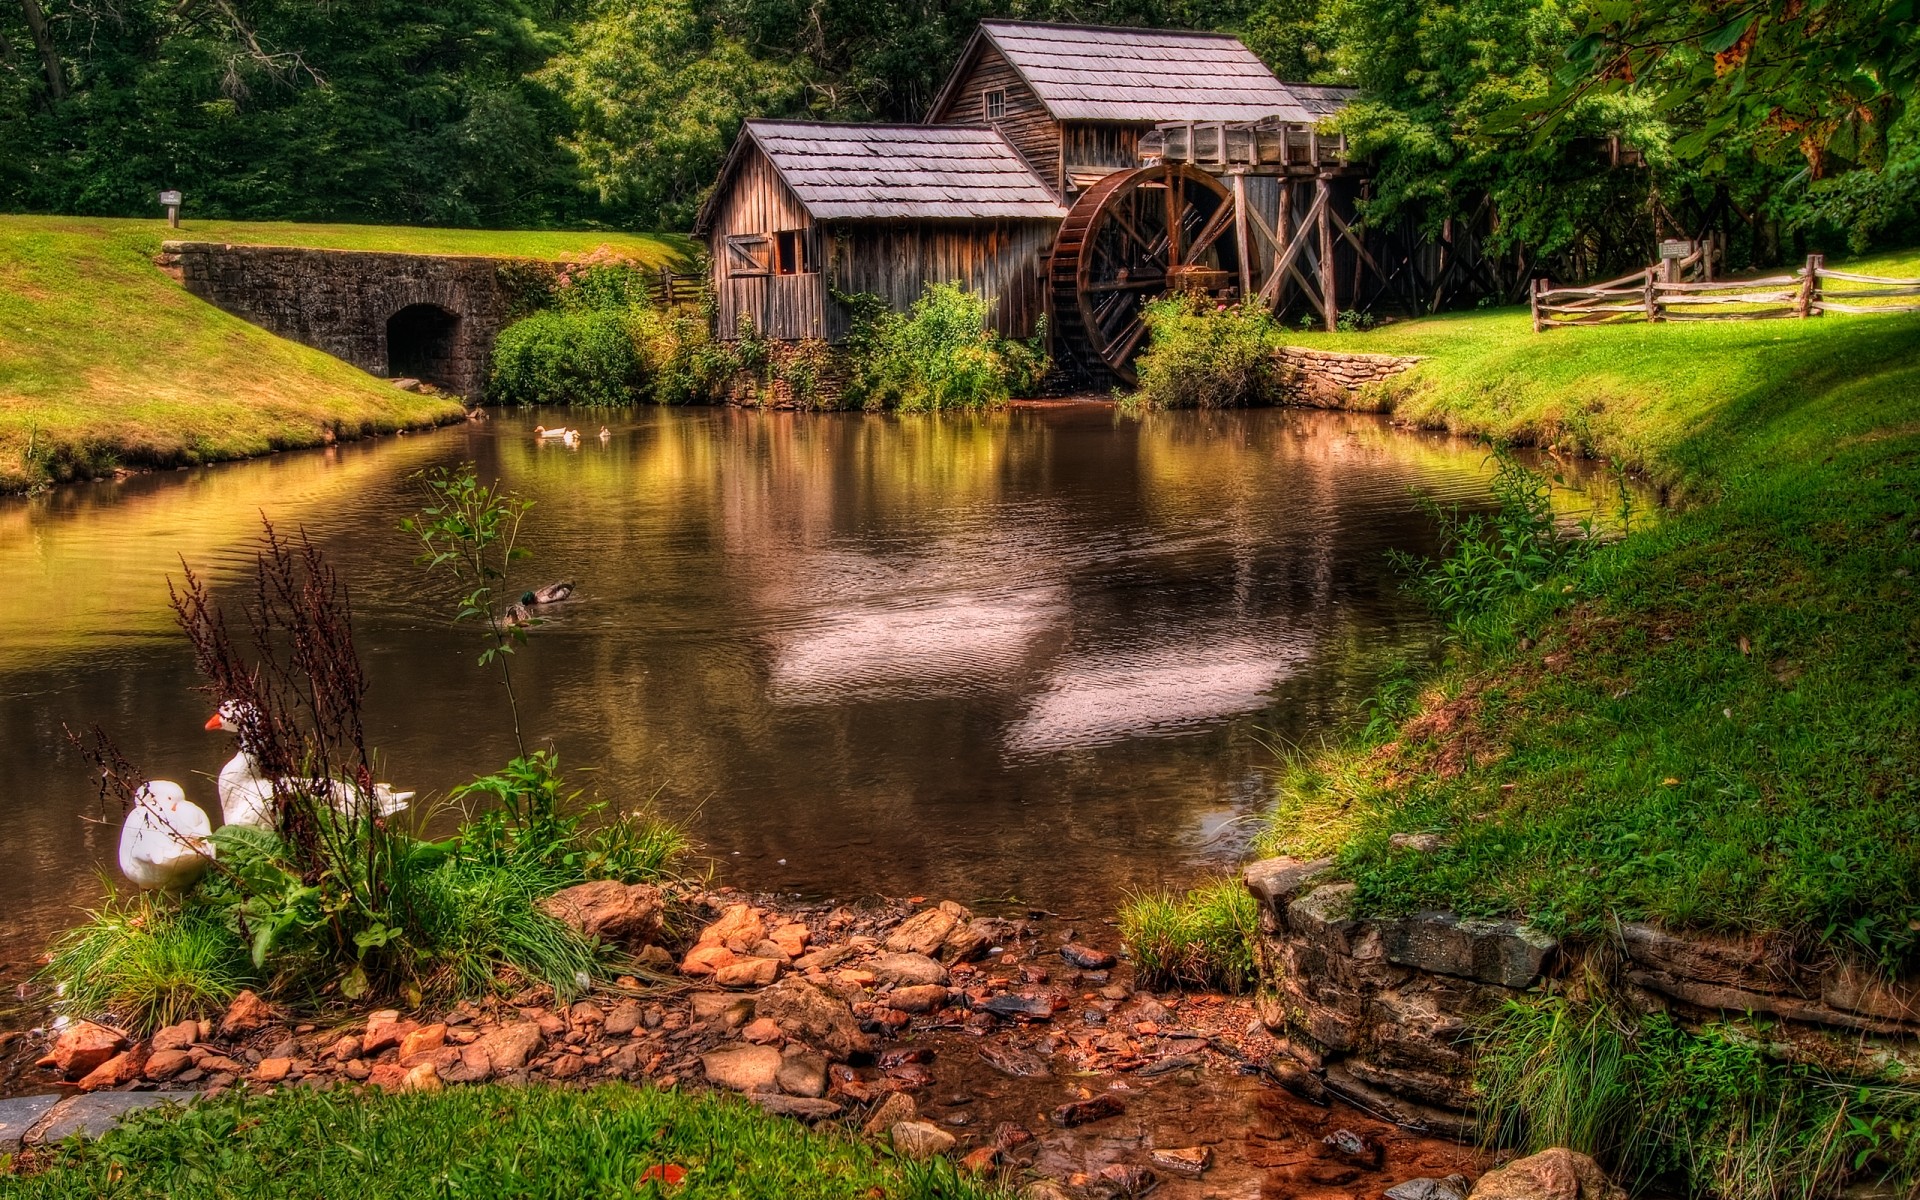 landscapes water wood river nature landscape outdoors bridge grass tree rural fall lake travel leaf rustic summer countryside pool house hdr forest